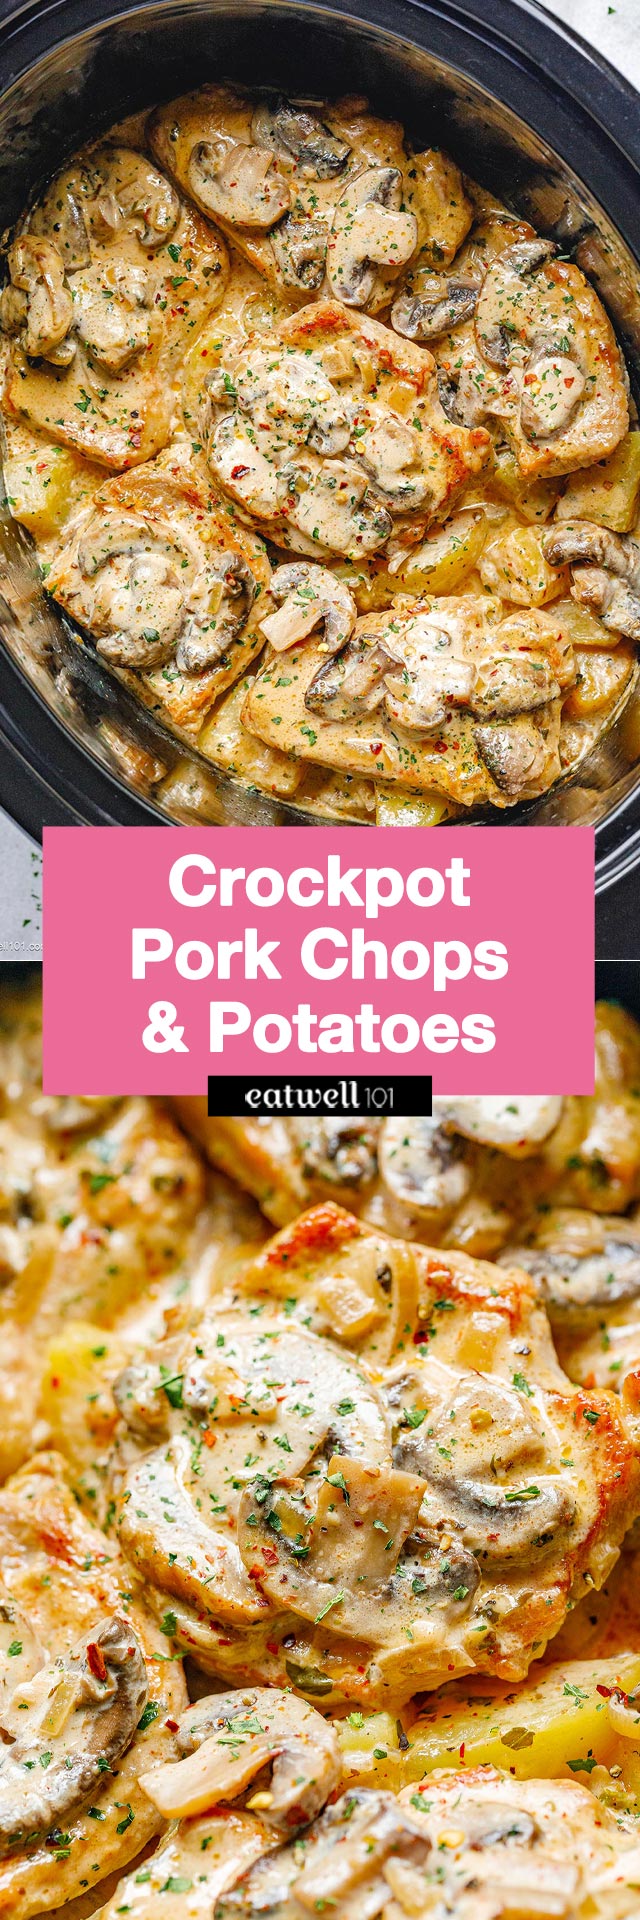 Creamy Garlic Pork Chops with Mushrooms and Potatoes - #slowcooker #porkchops #potatoes #recipe #eatwell101 - These slow cooker pork chops are incredibly easy to make and smothered in a creamy, mouthwatering garlic sauce!